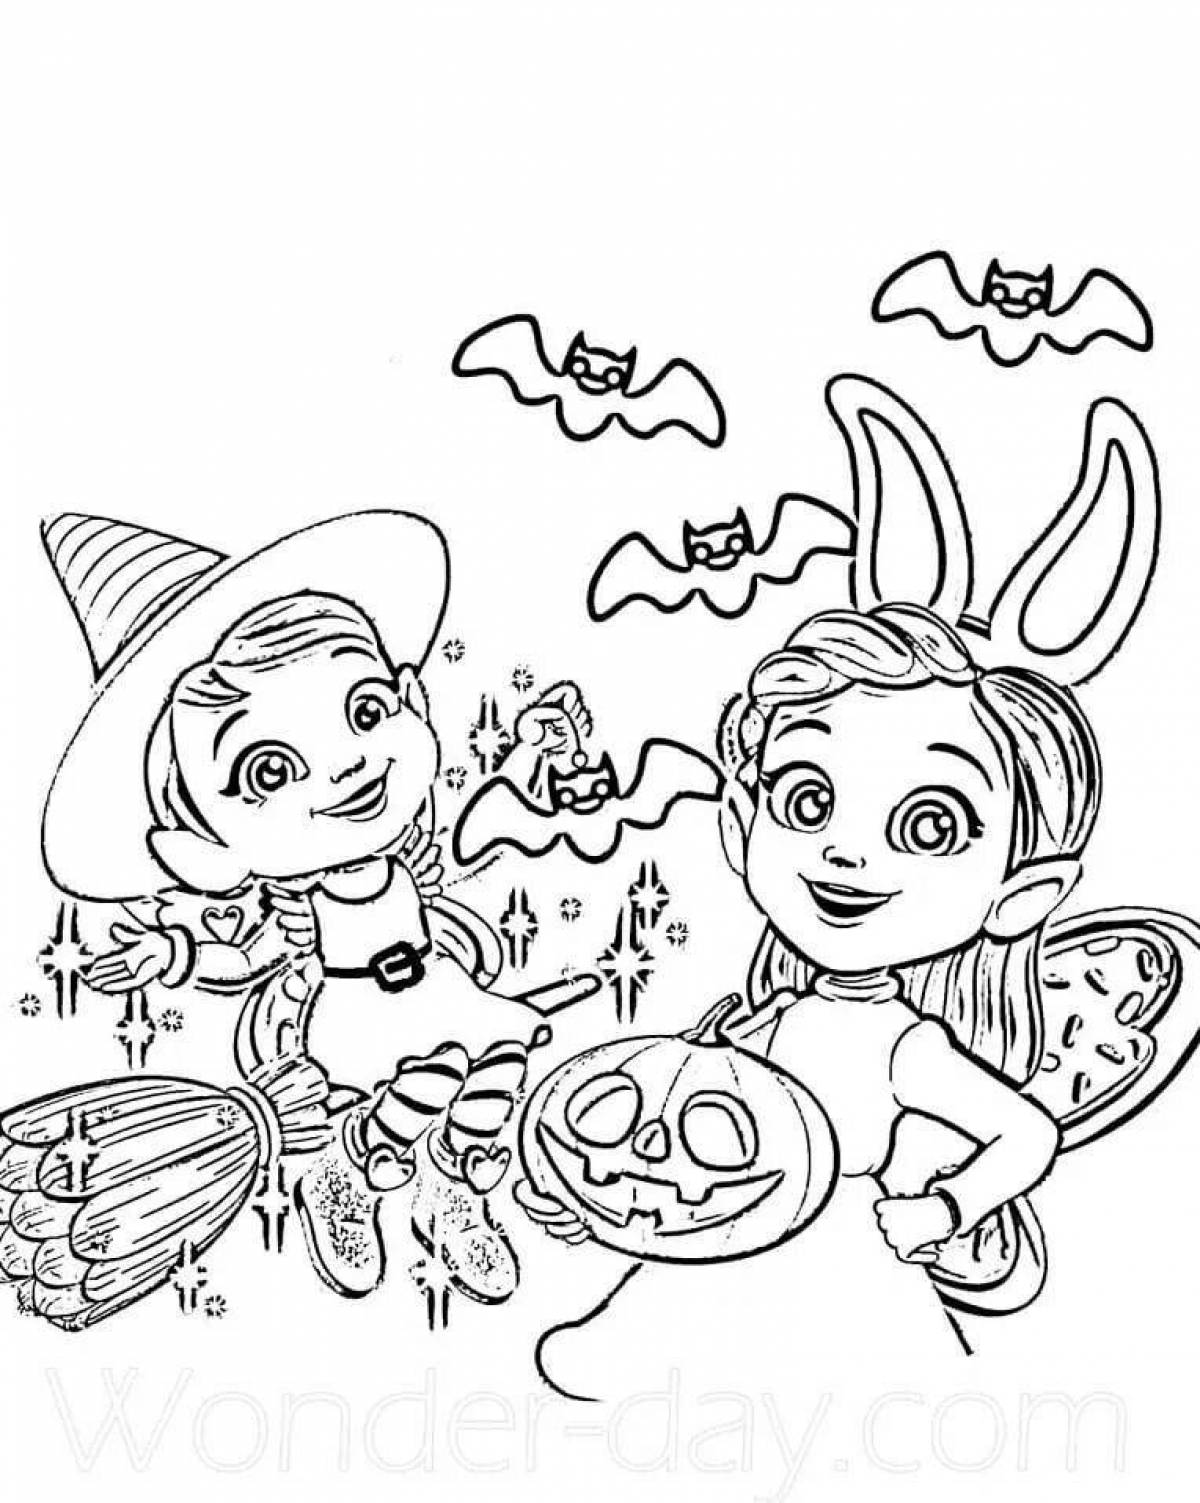 Magic cafe butterbean coloring page